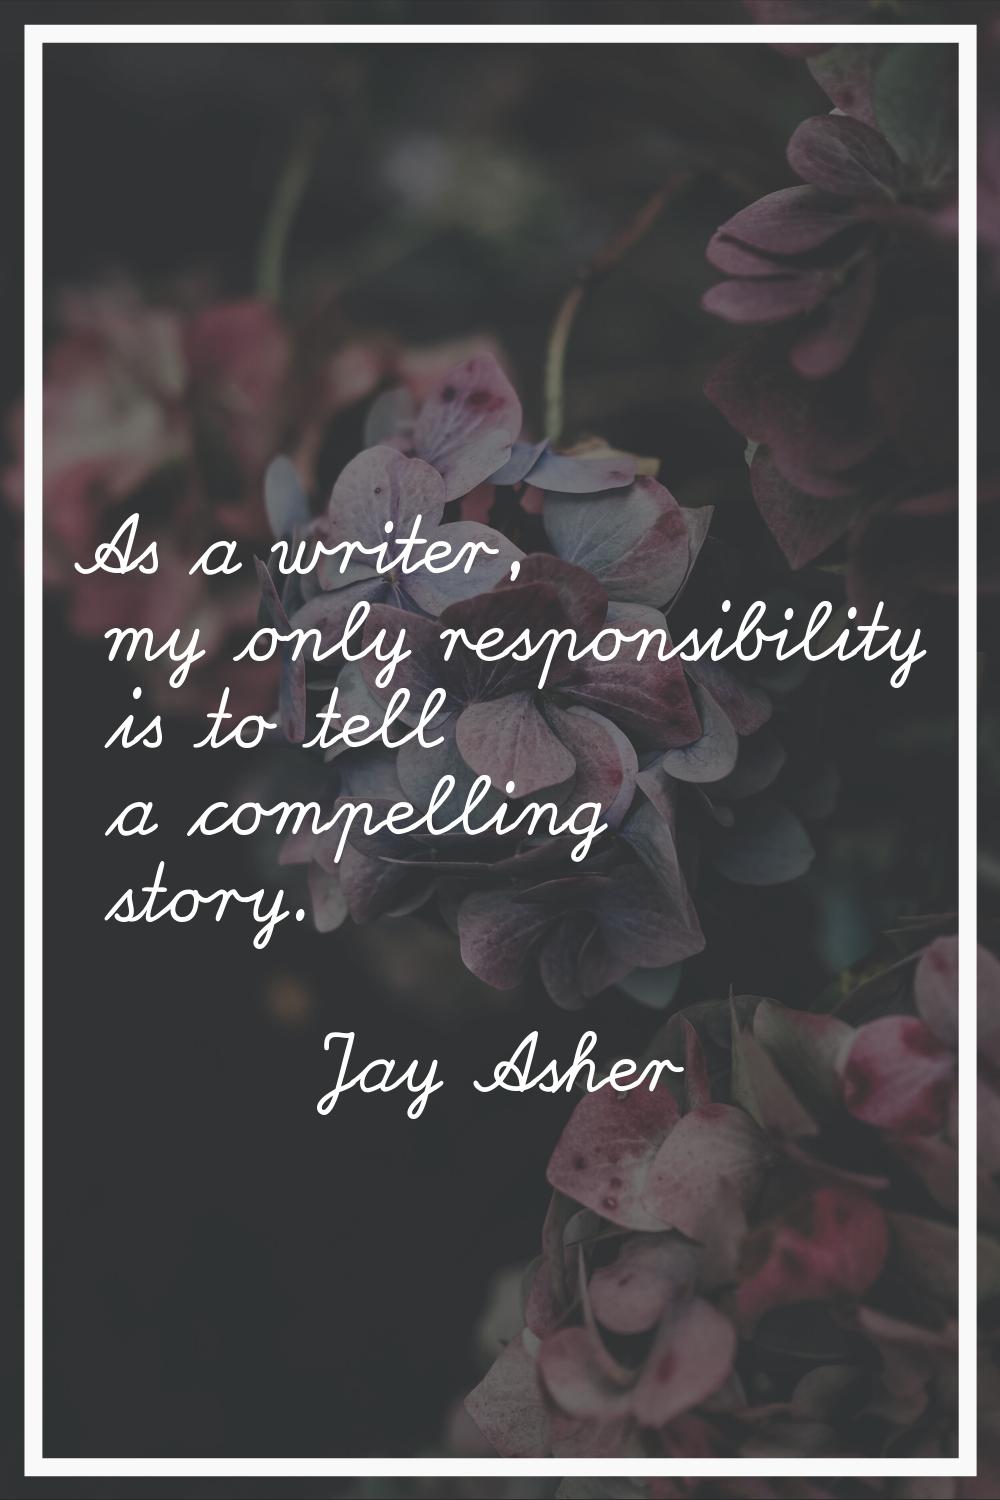 As a writer, my only responsibility is to tell a compelling story.